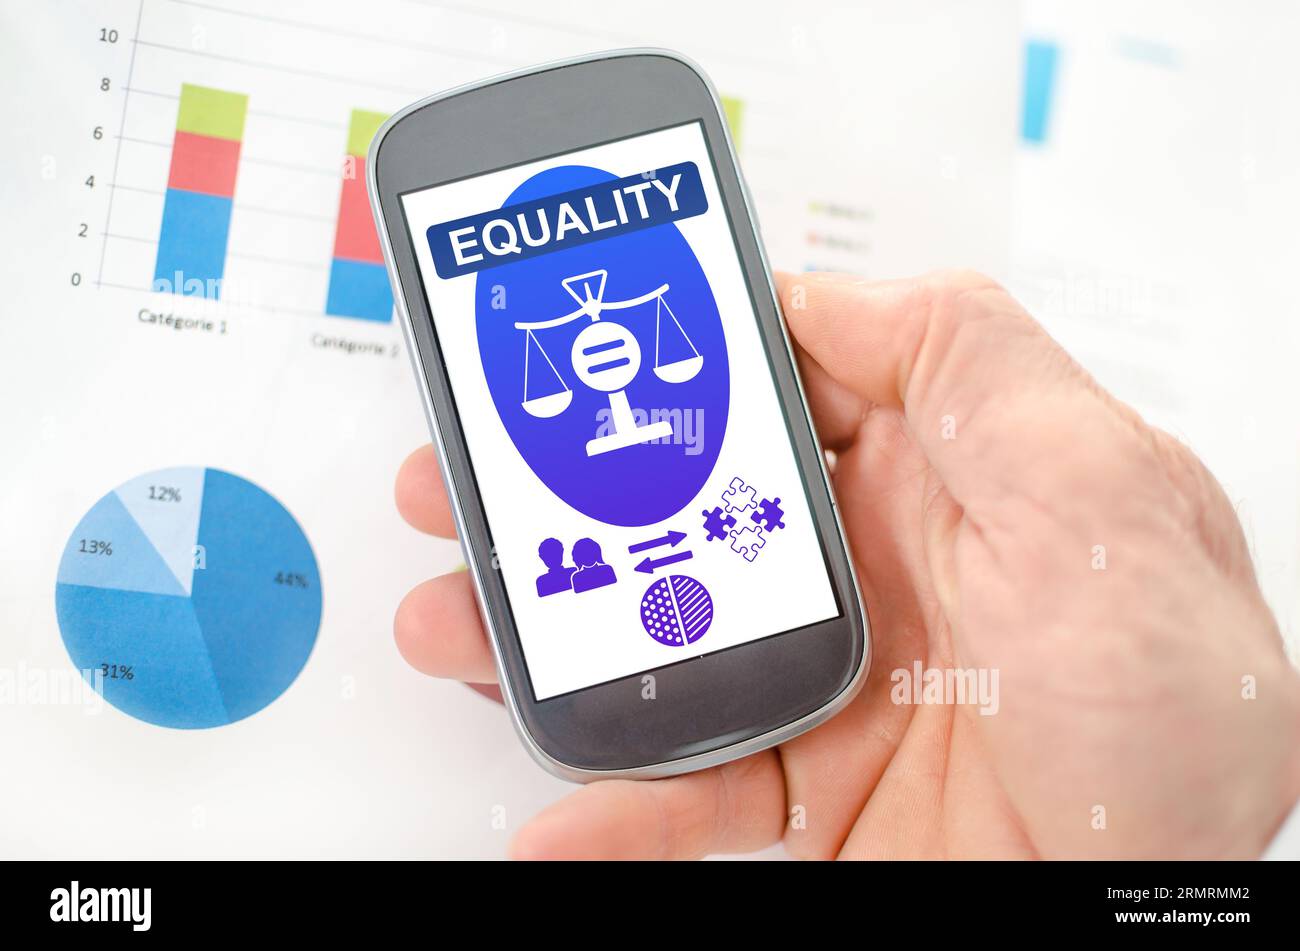 Equality concept on a smartphone held by a hand Stock Photo